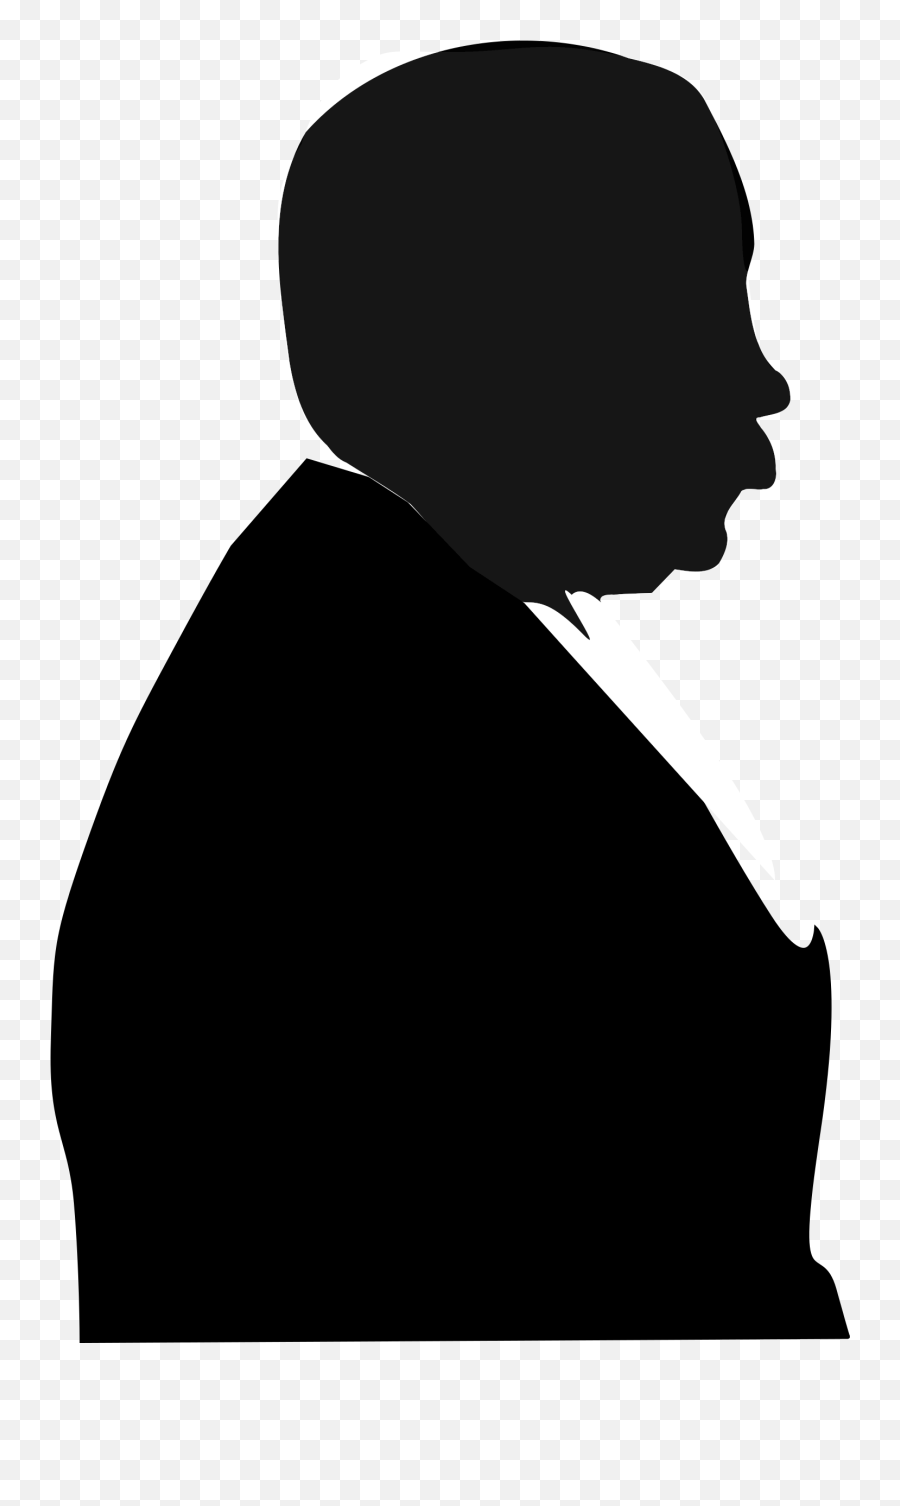 Old Man Silhouette Png 1 Image - Old Man Silhouette Face,Man Silhouette Png